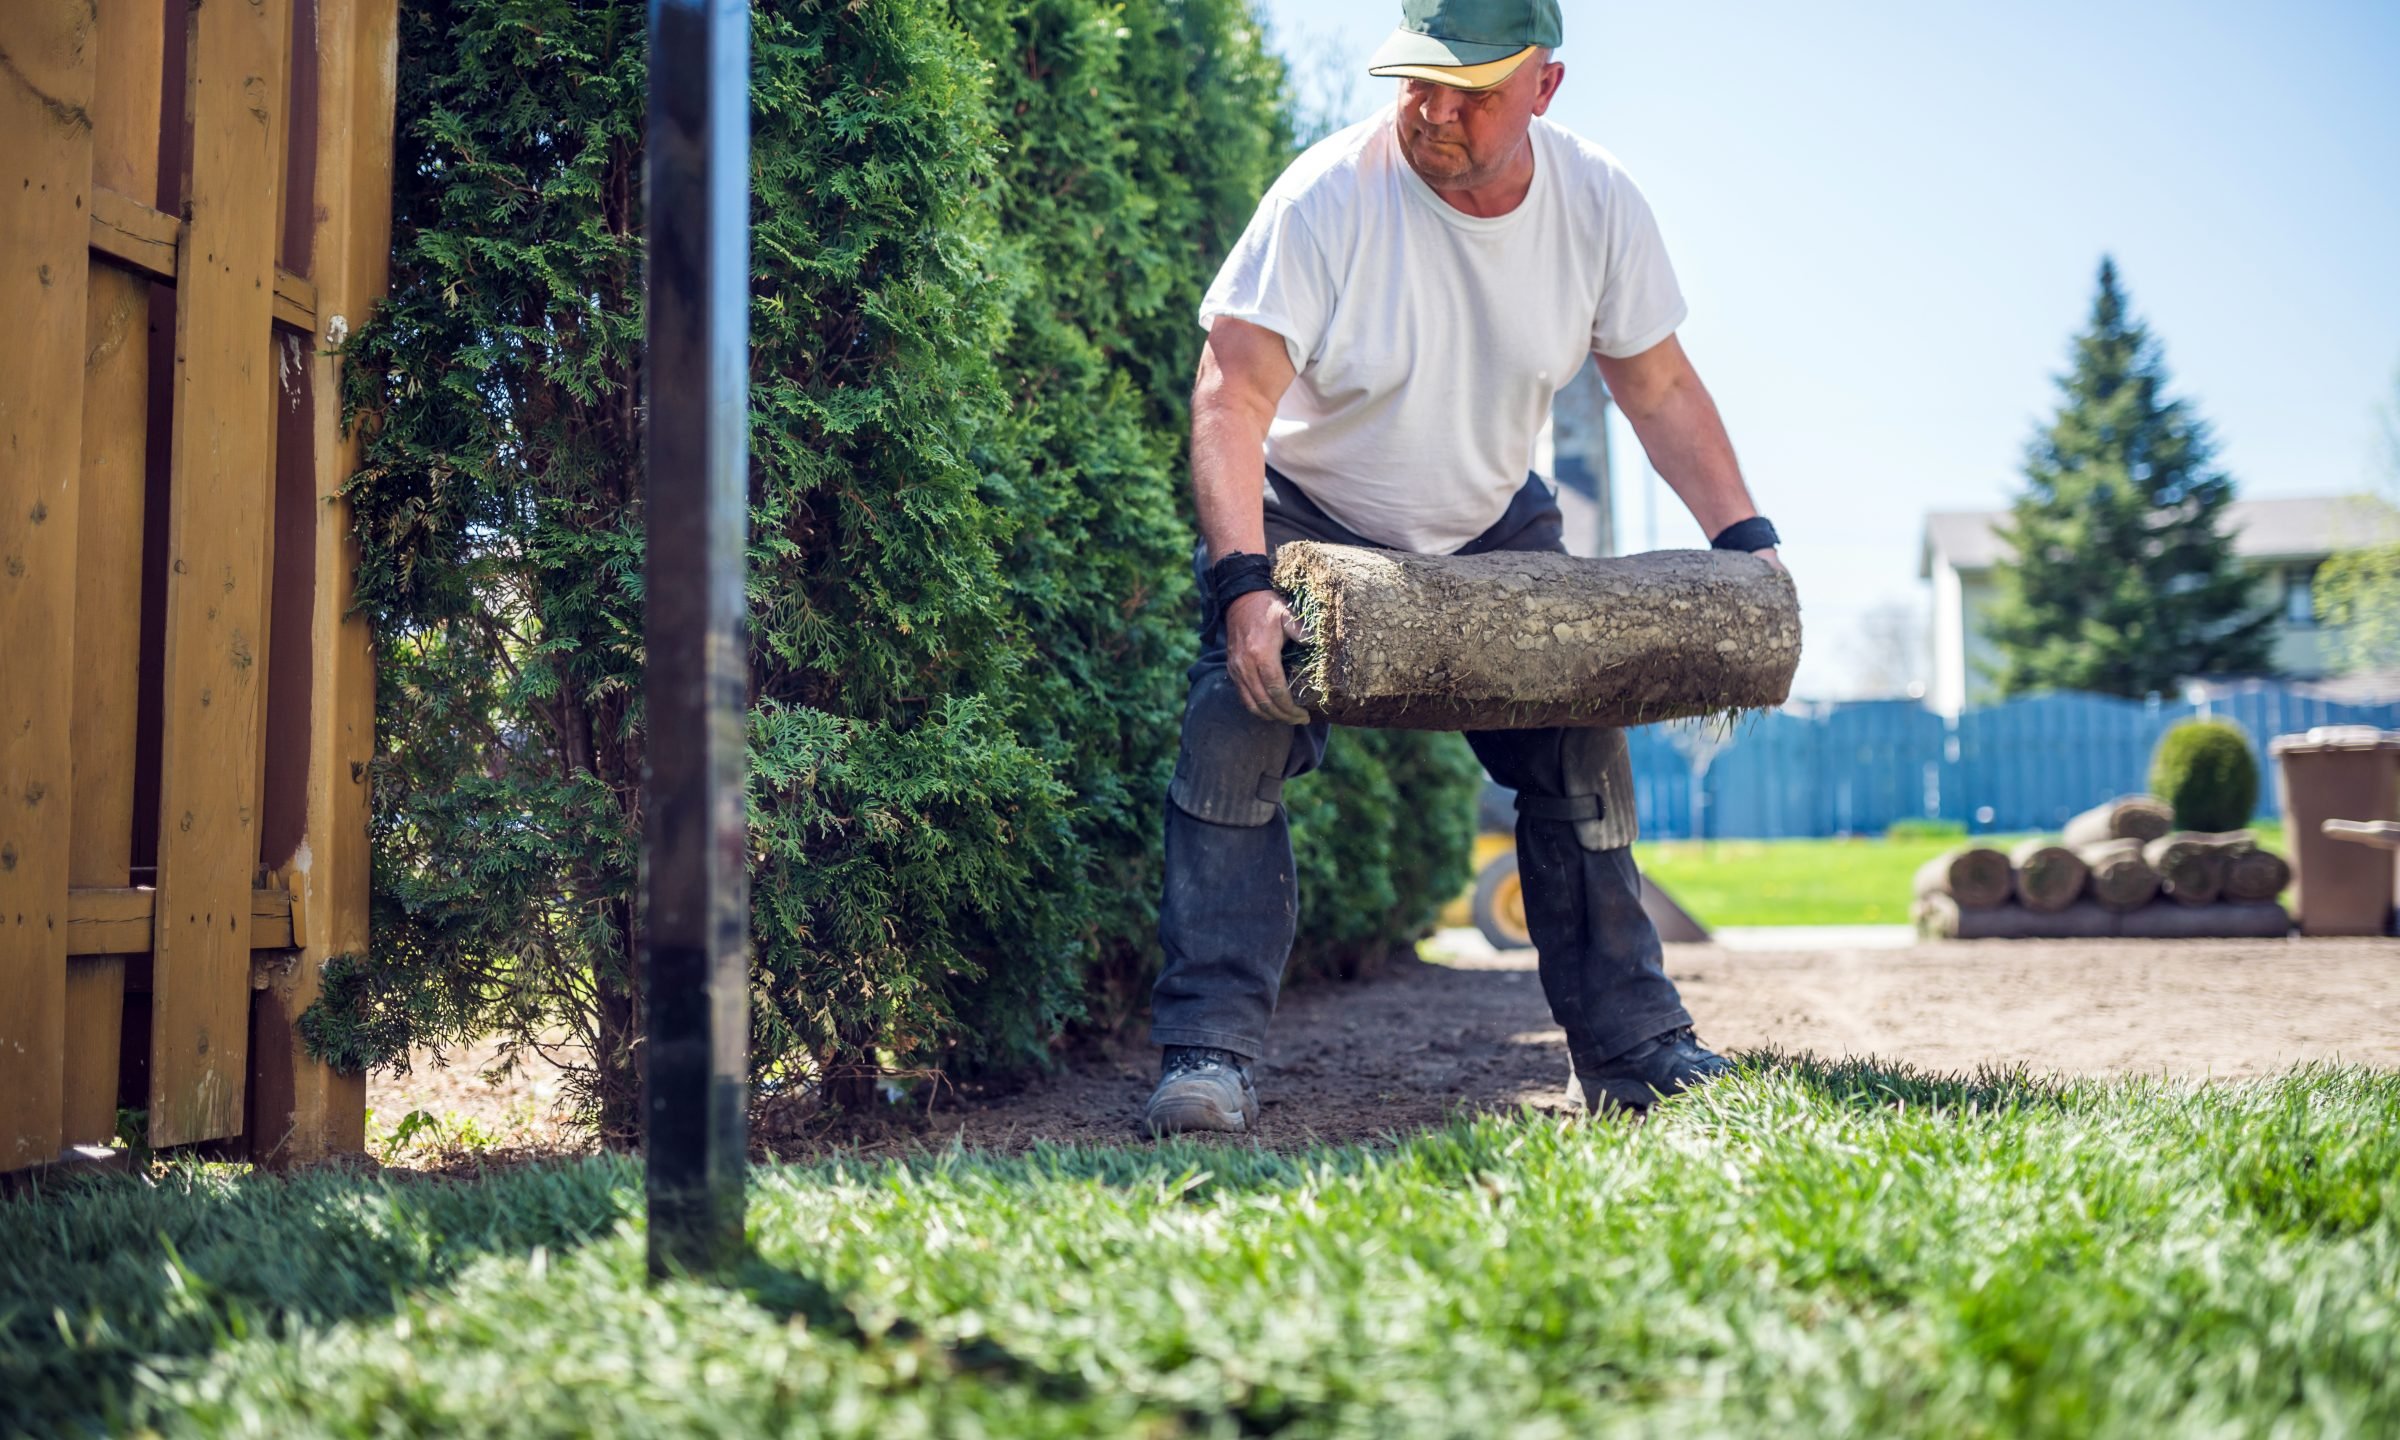 A Landscaping Or Lawn Care Business, How Much Does A Landscaper Make An Hour